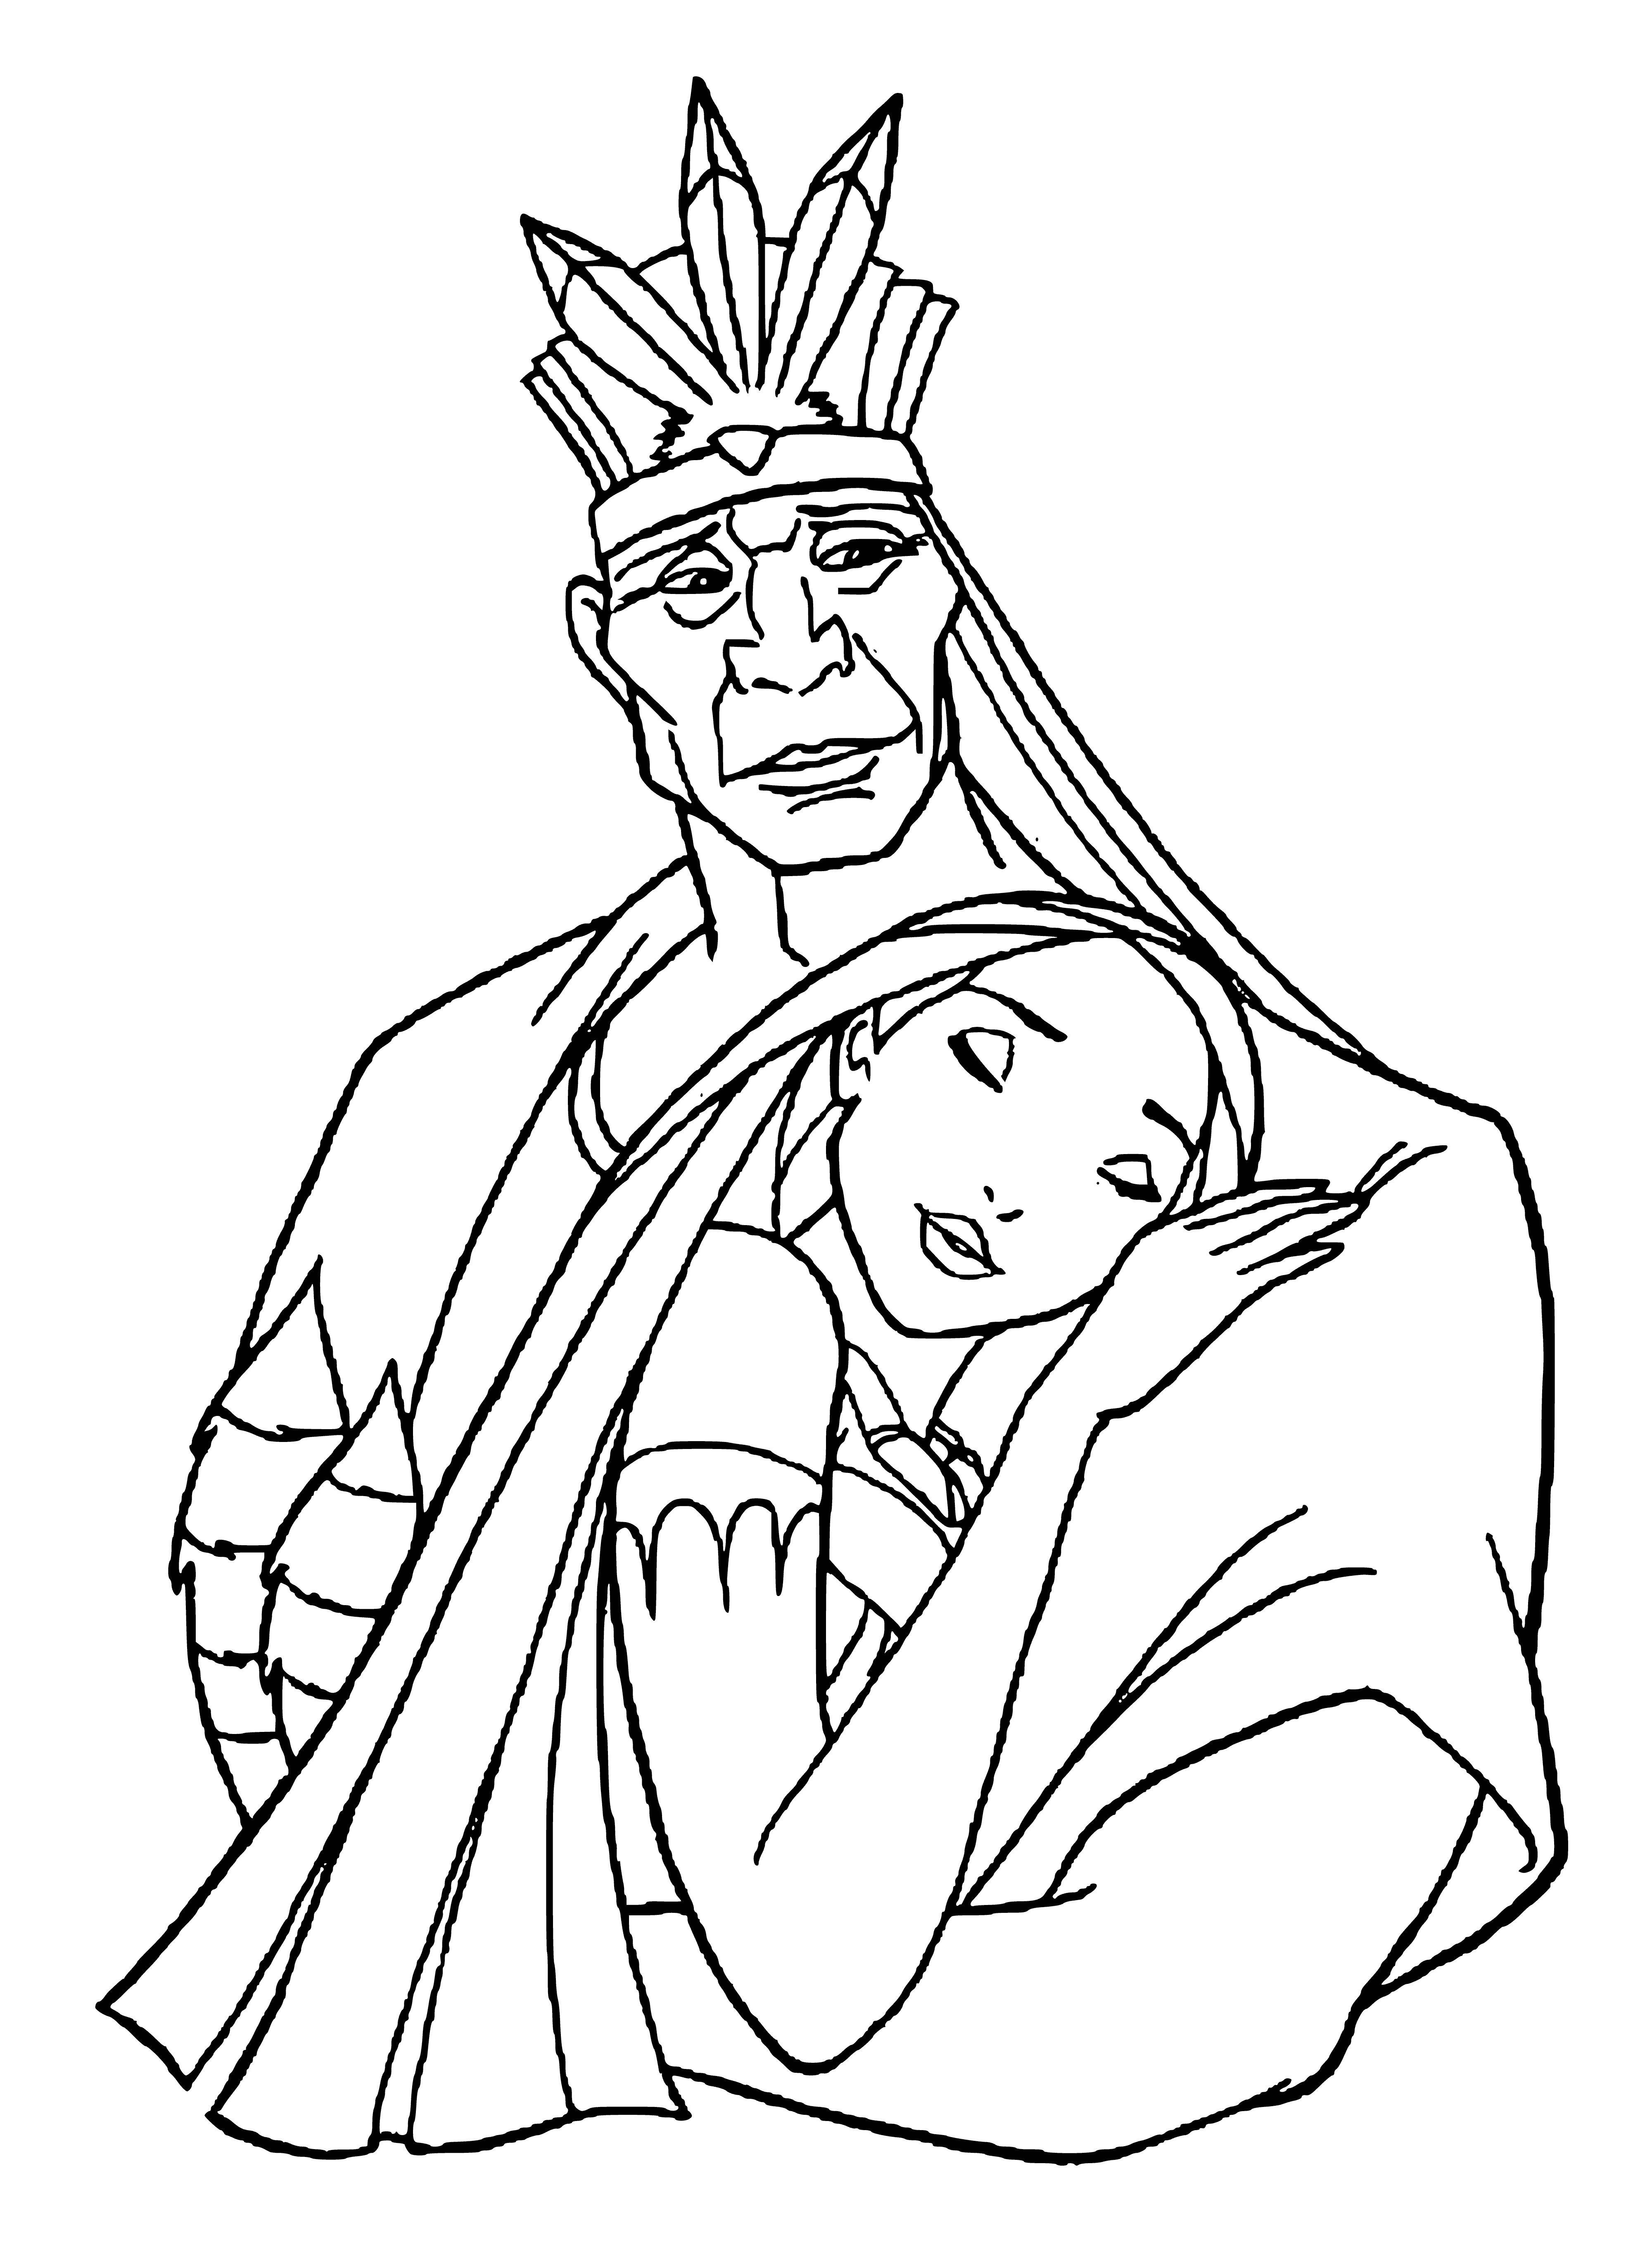 Pocahontas and her father coloring page